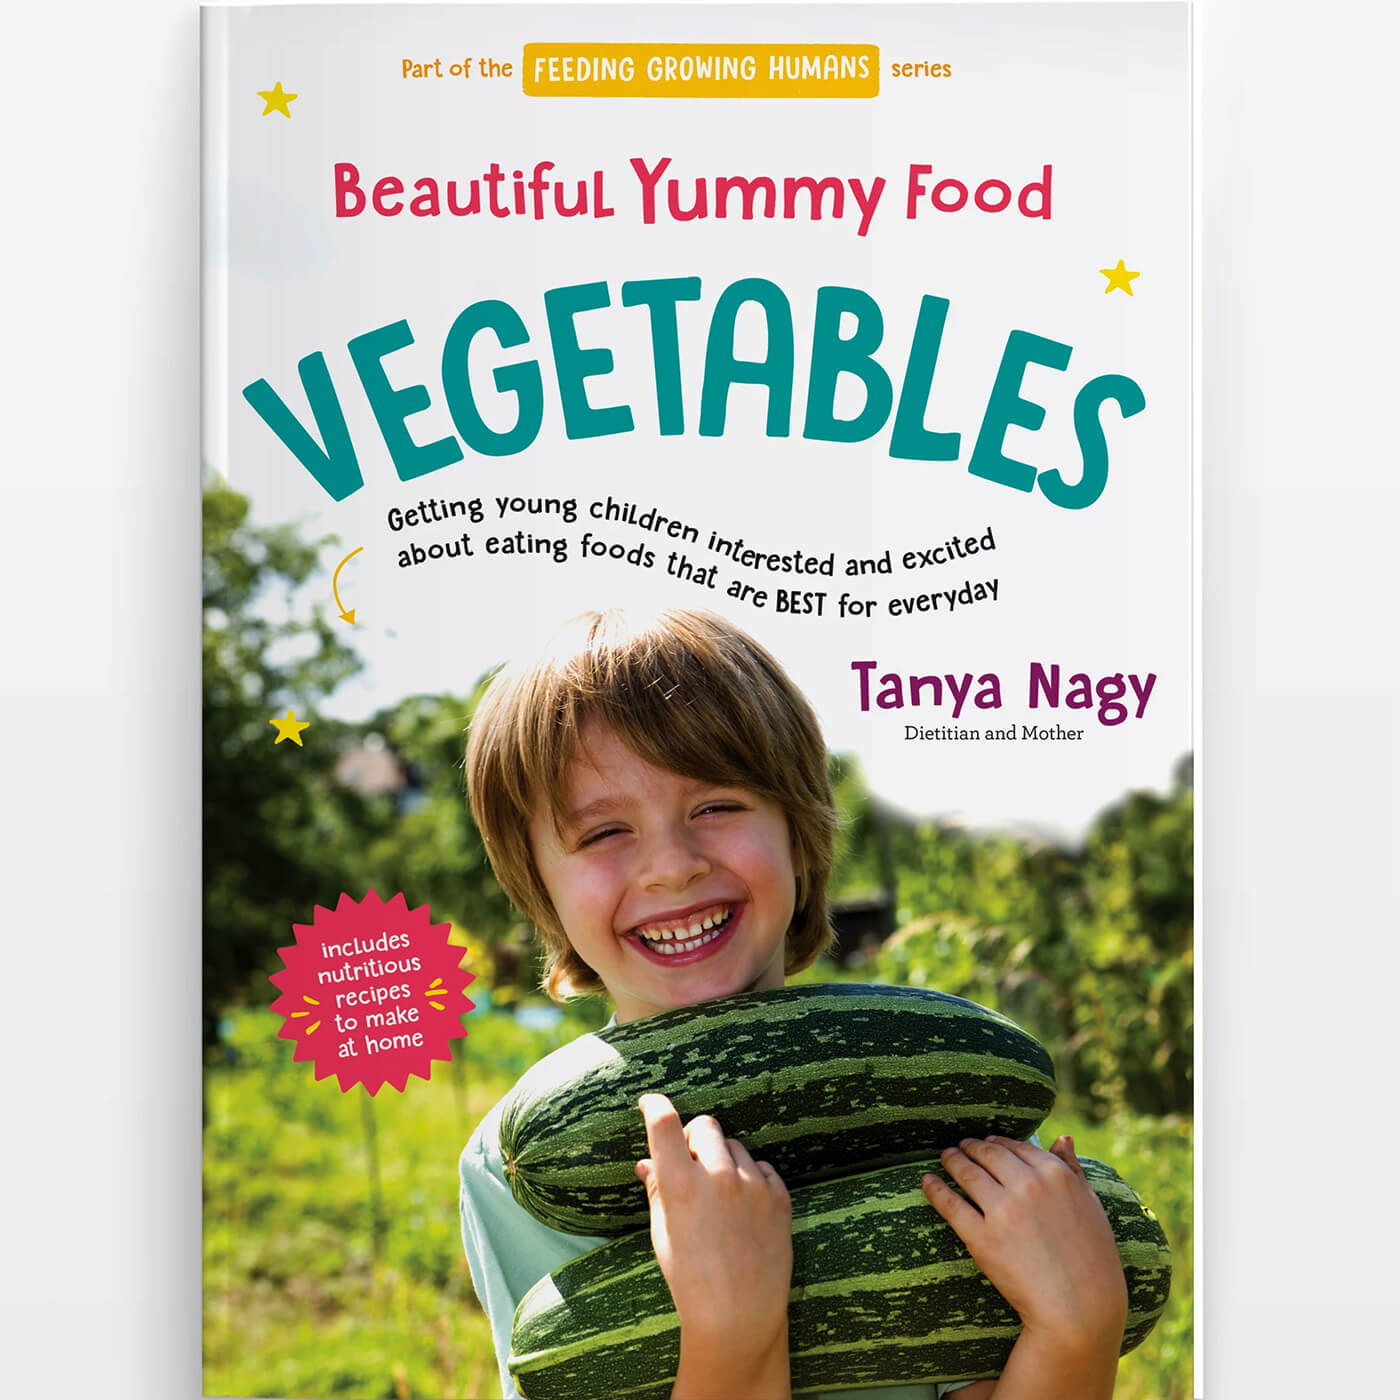 'Beautiful Yummy Food: Vegetables' children's book cover